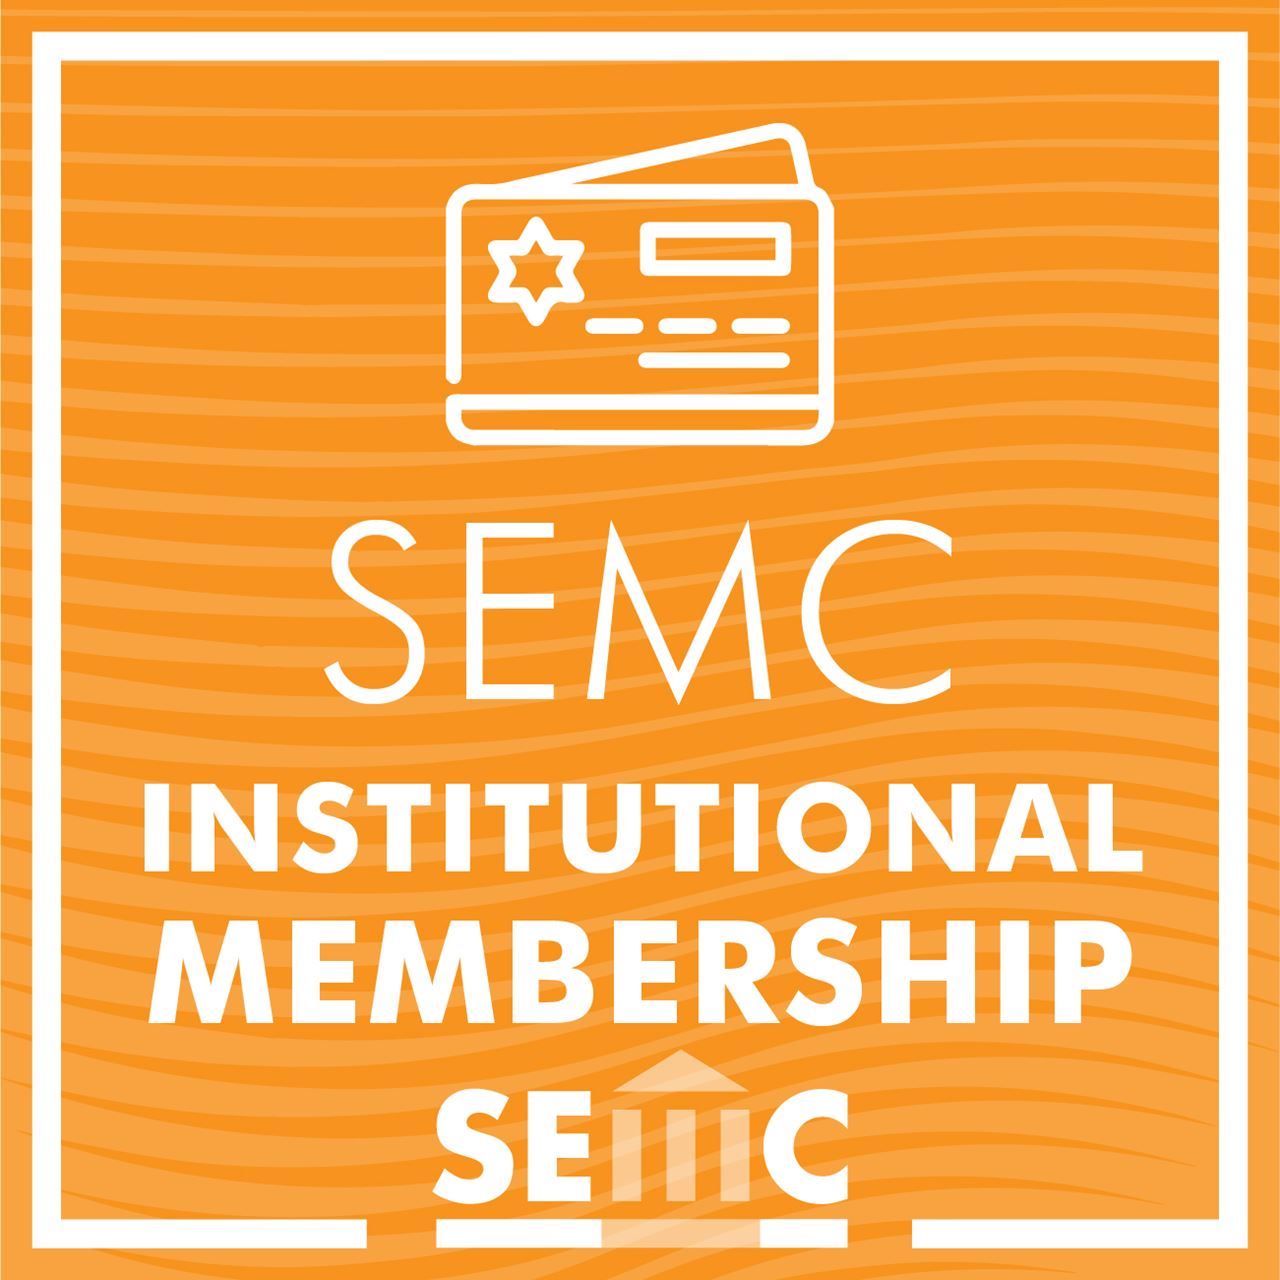 Light orange striped background, with a graphic of cards and the words “SEMC Institutional Membership” centered. The SEMC logo is also at the bottom.